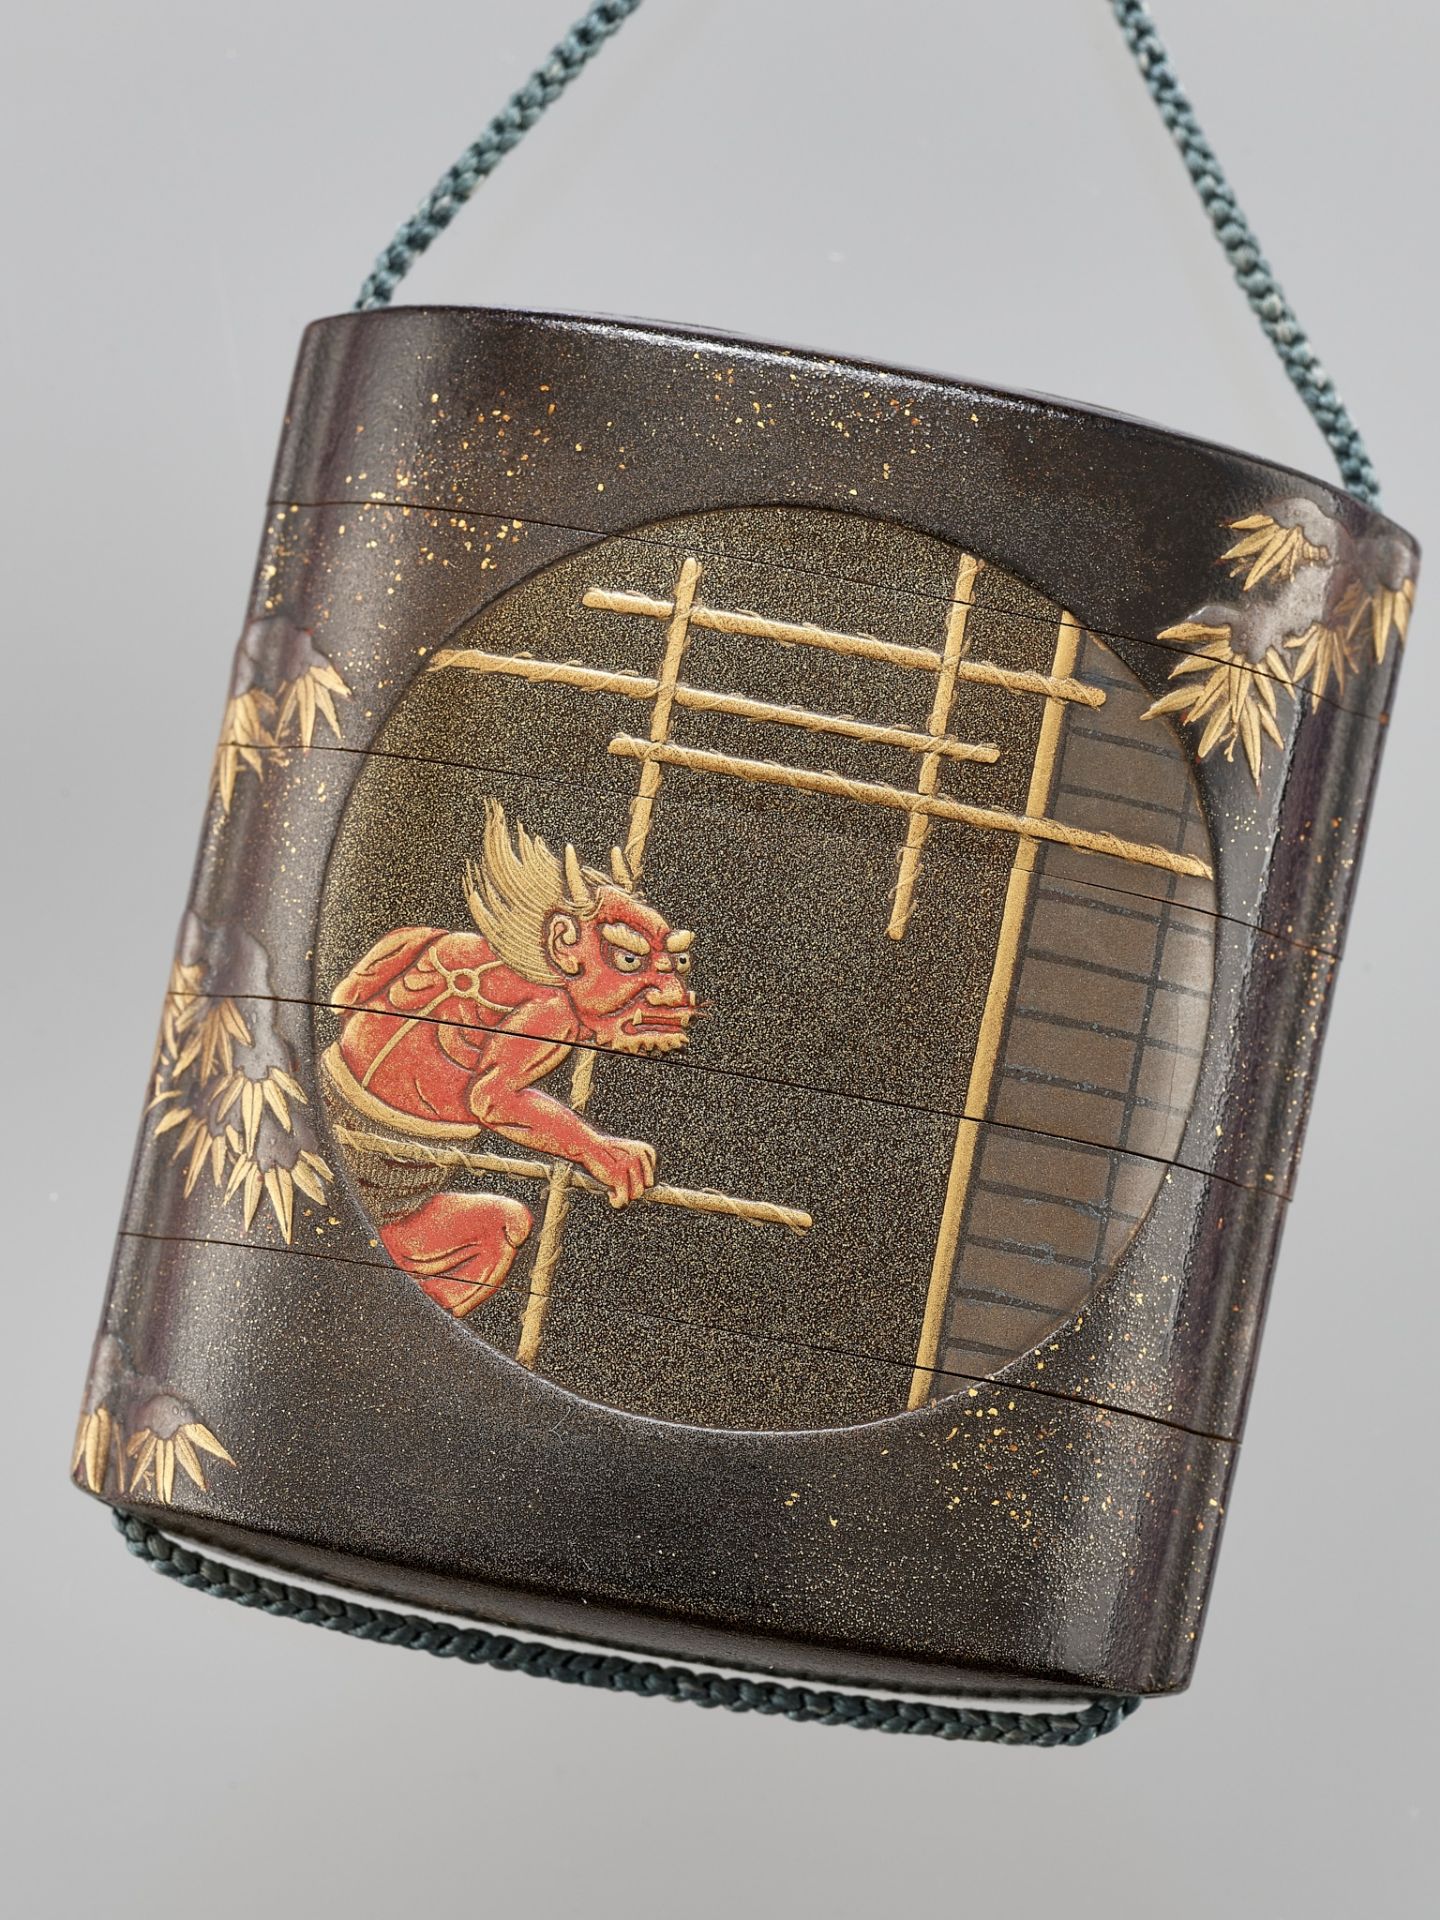 YOYUSAI: AN EXQUISITE SMALL LACQUER FOUR-CASE INRO DEPICTING OKAME AND ONI AT SETSUBUN - Image 2 of 8